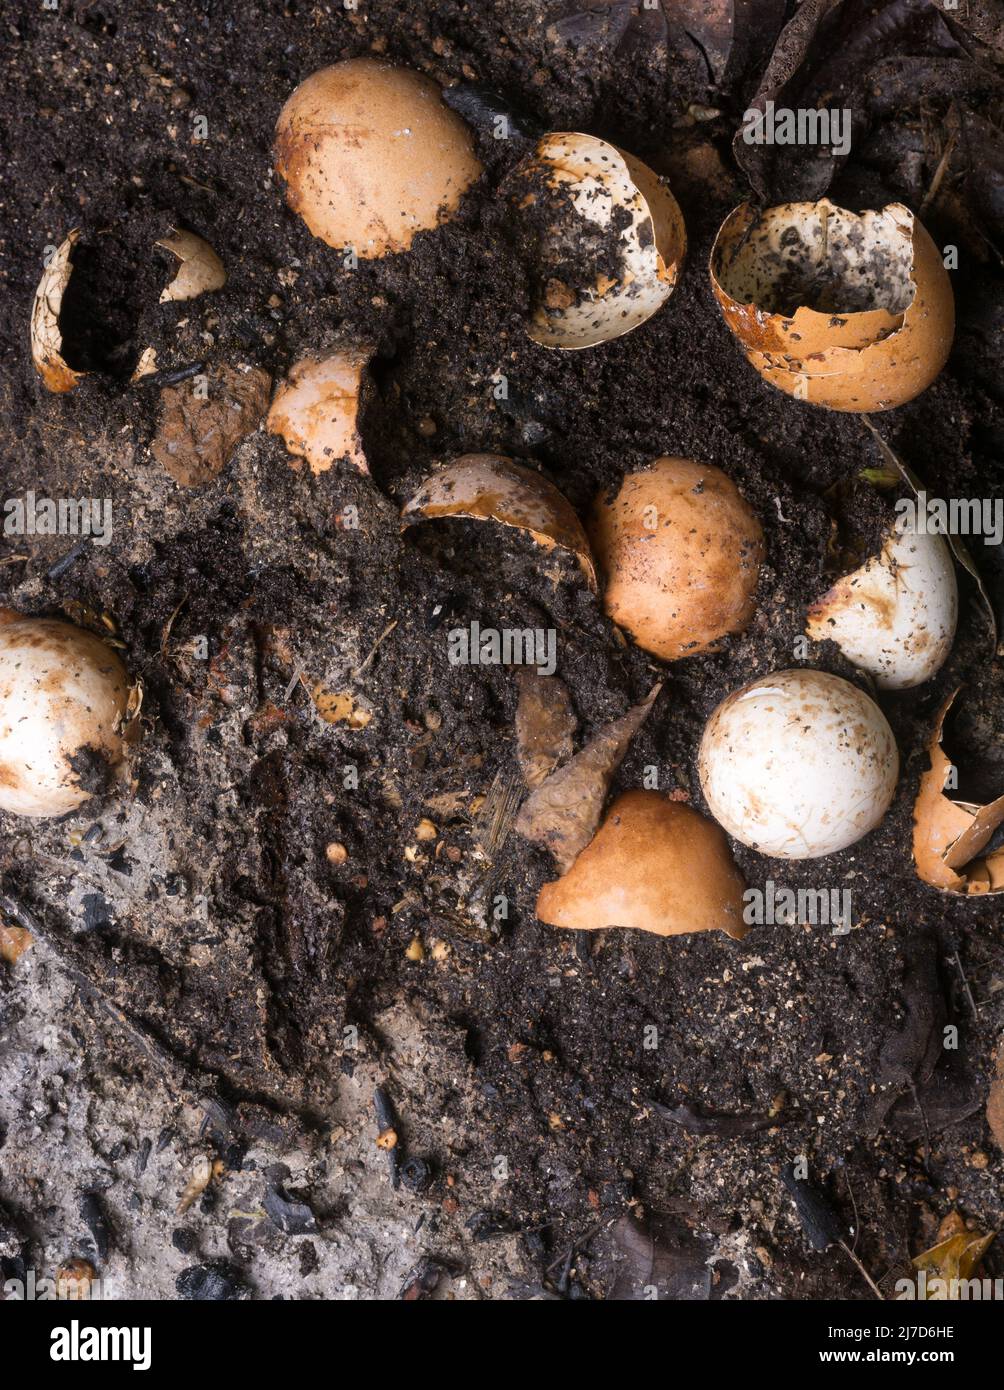 egg shells mixed with garden soil to provide nutrients for plants, food waste used as organic fertilizer, environmental and gardening concept Stock Photo